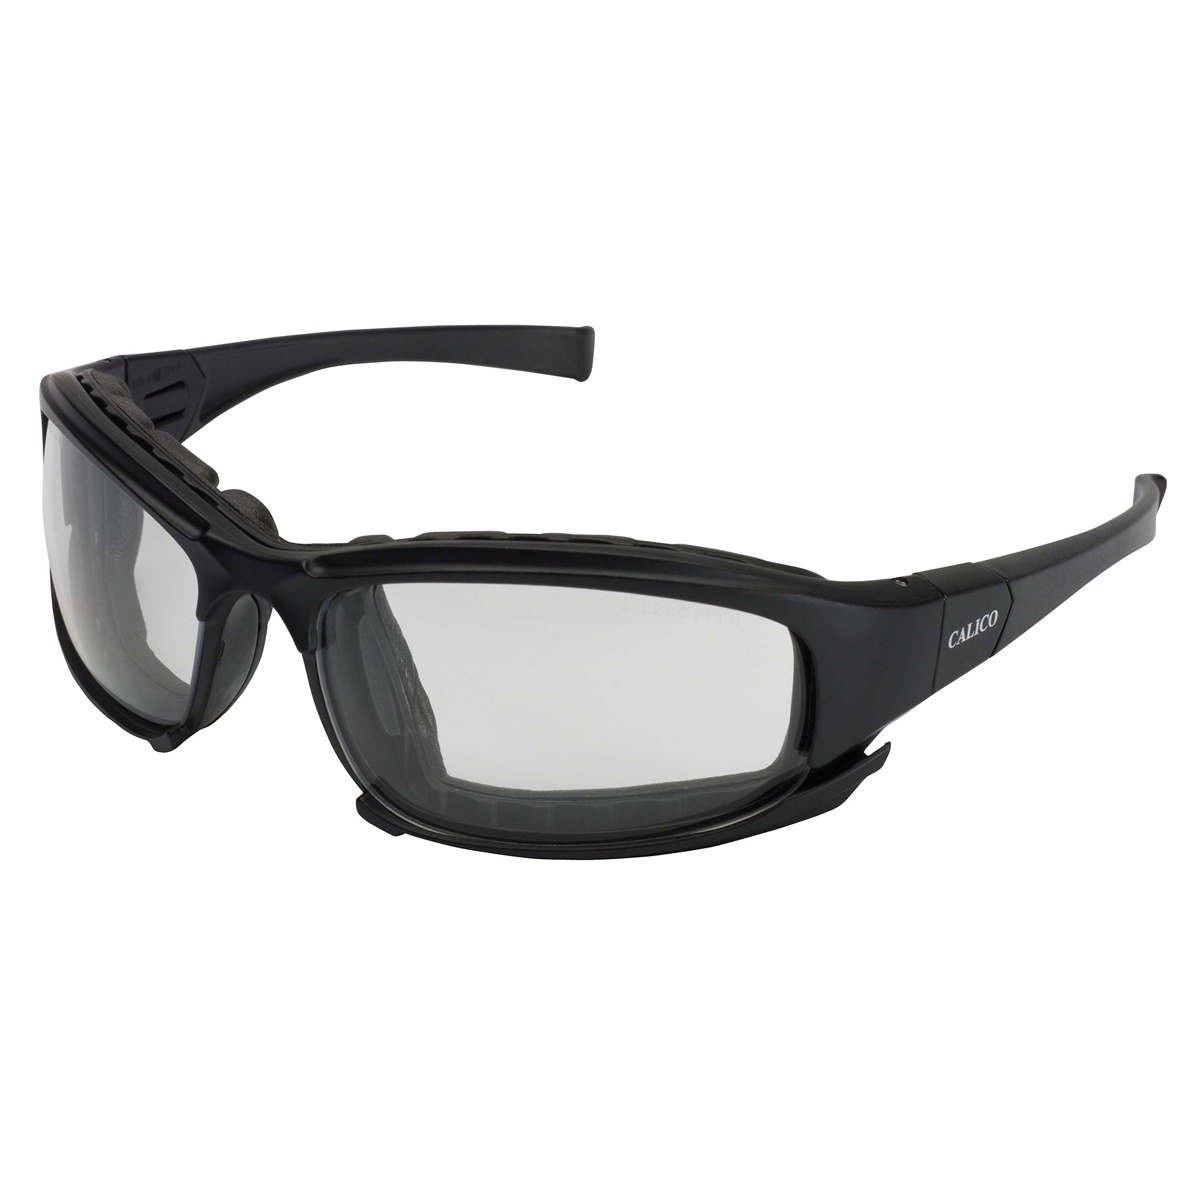 Kimberly-Clark Professional* KleenGuard™ Calico* Black Safety Glasses With Gray Anti-Fog/Anti-Scratch Lens (Availability restric